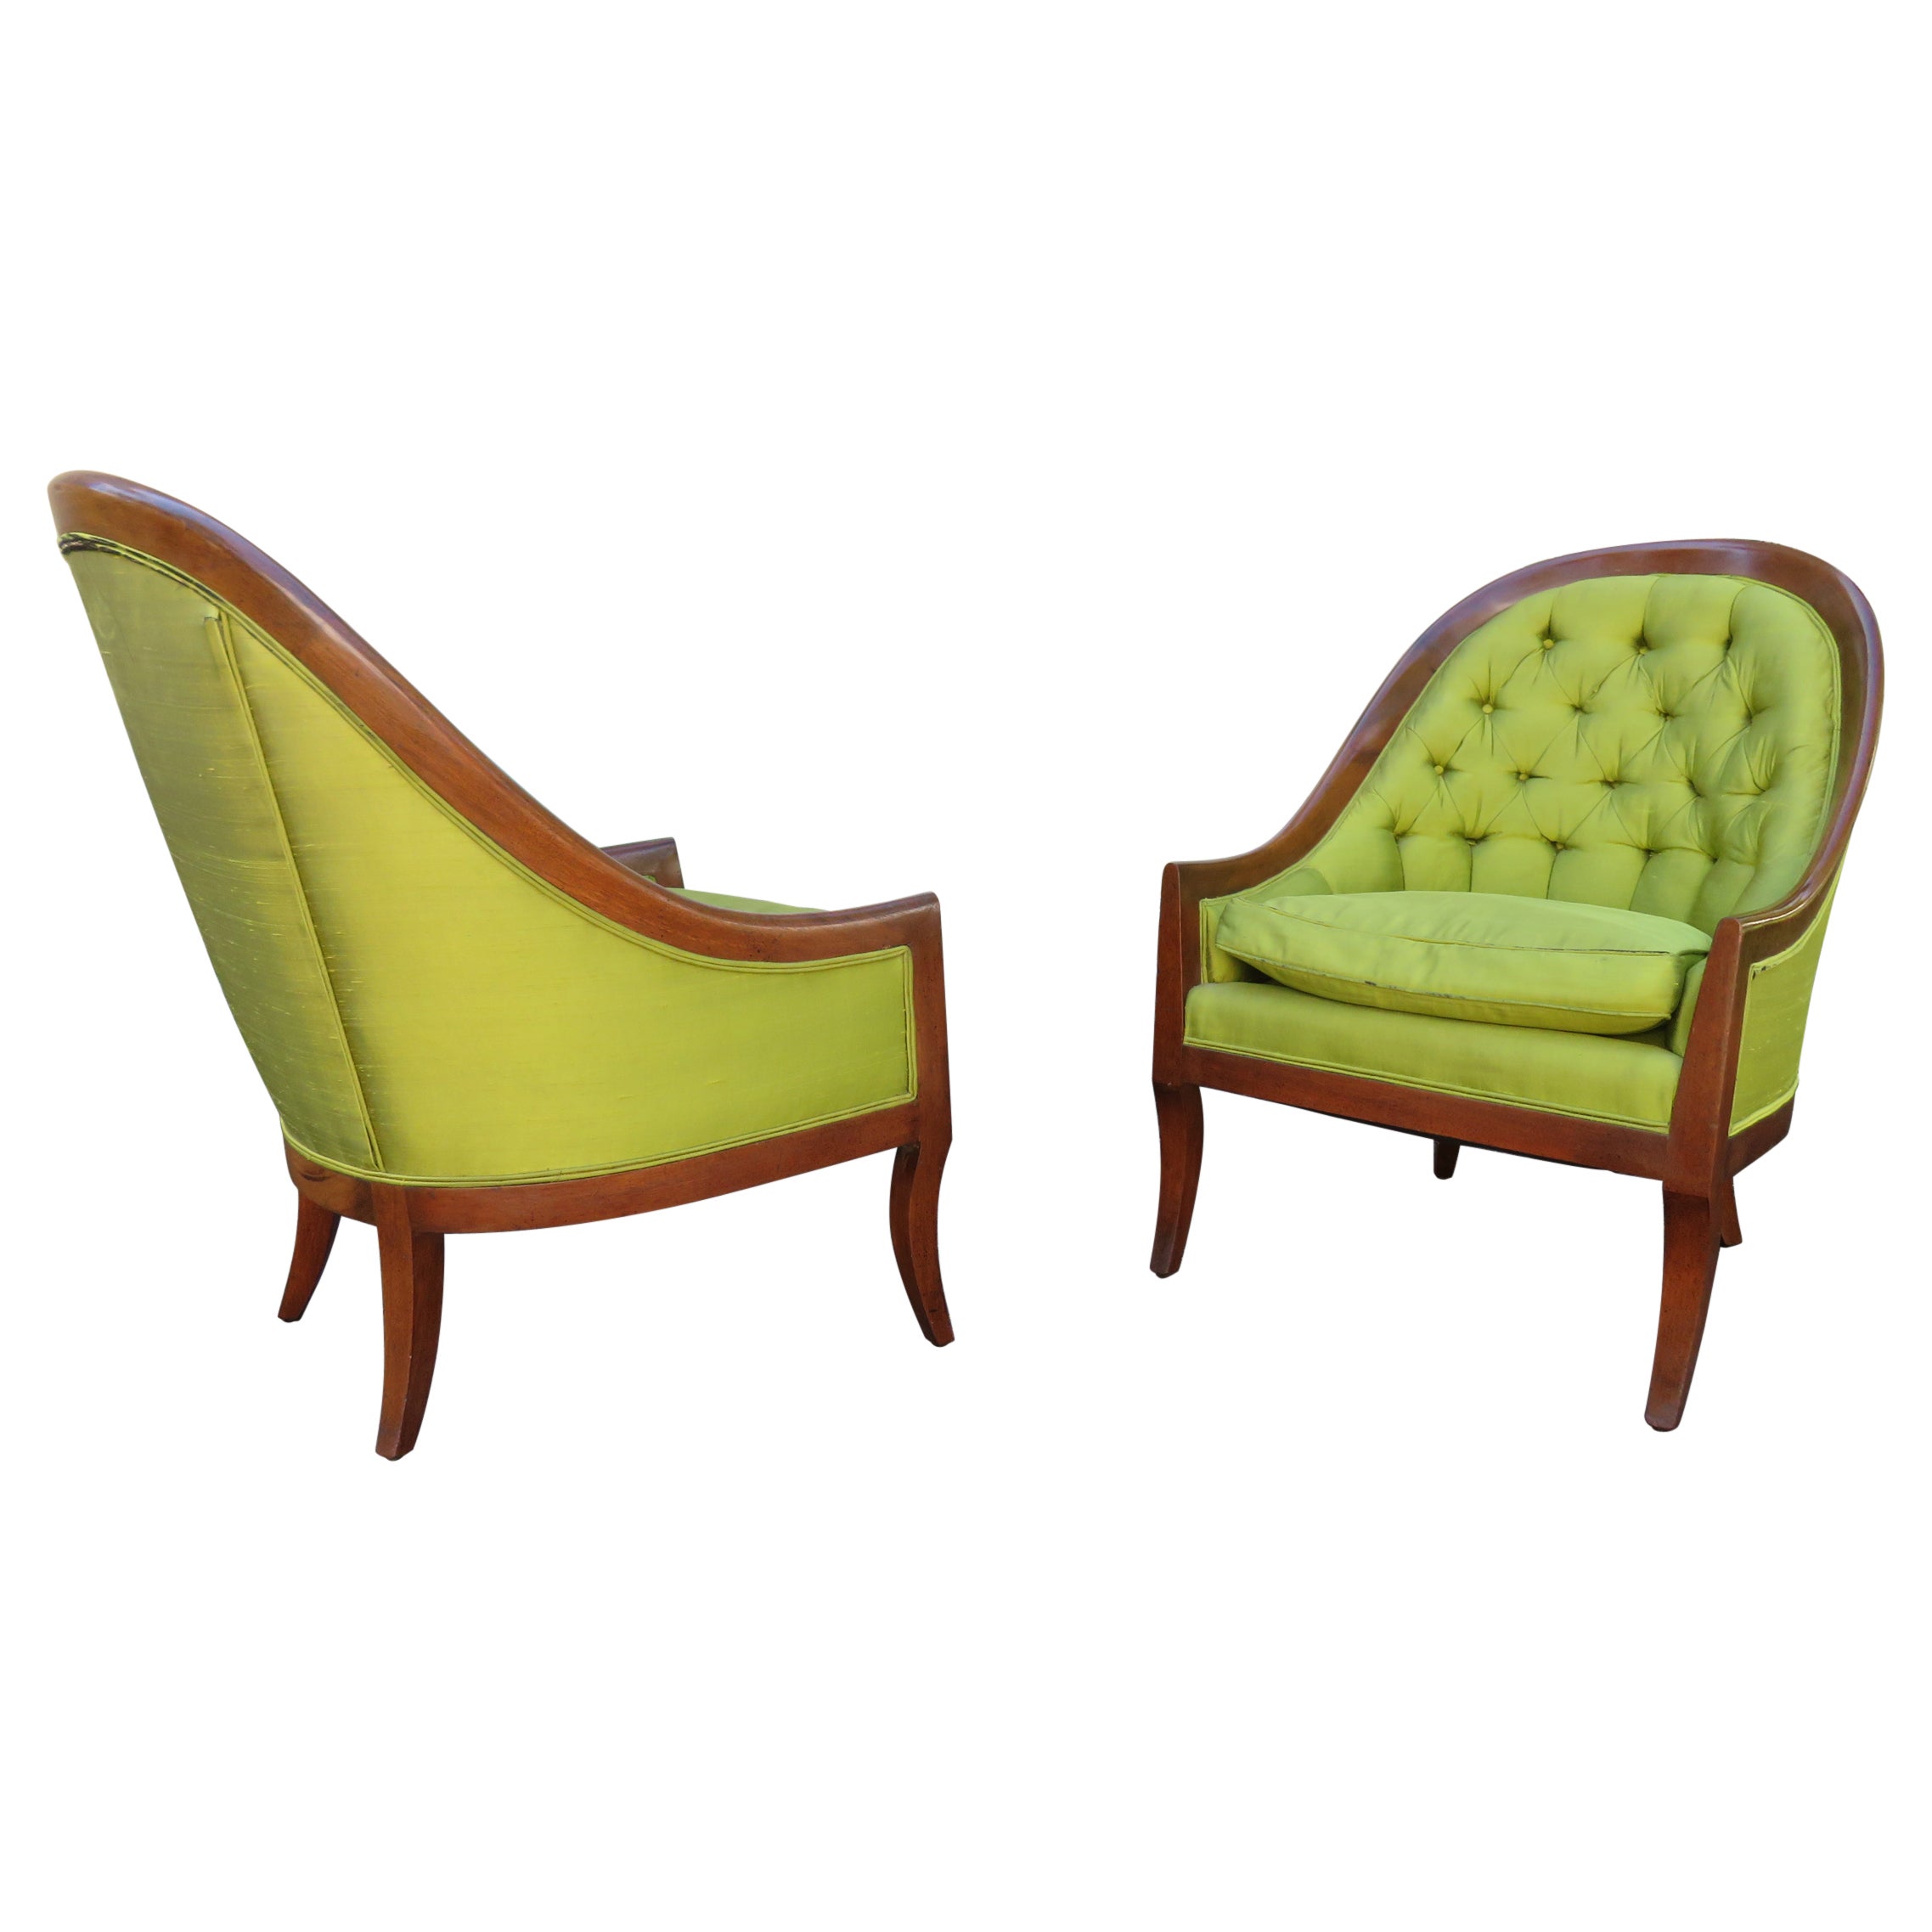 Lovely Pair 60s Classical Spoon Back Chairs Mid-Century Modern For Sale